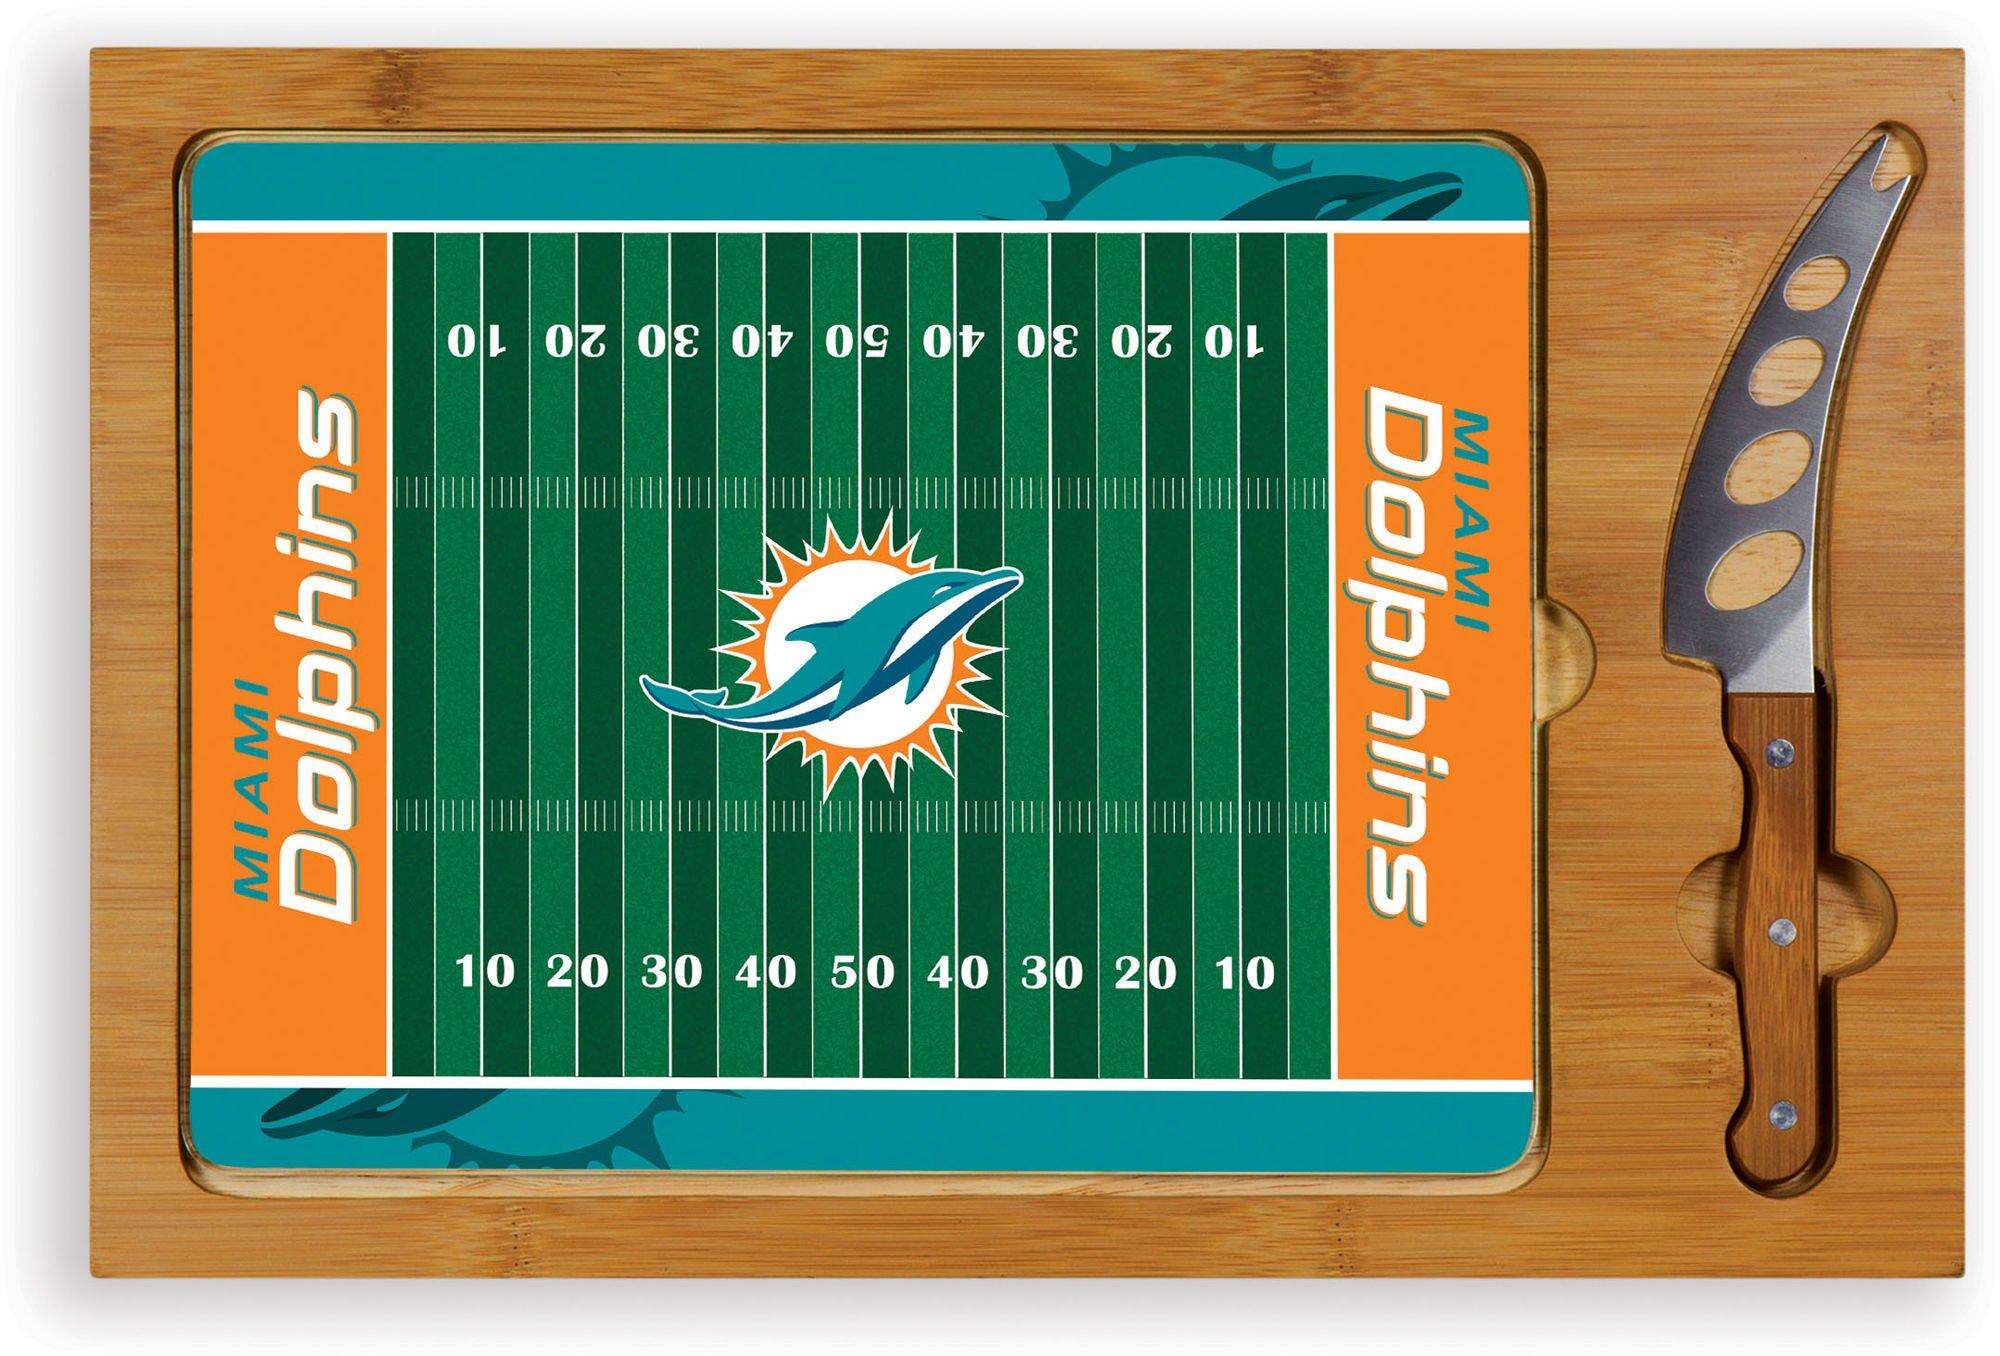 Miami Dolphins Icon Cutting Board by Picnic Time